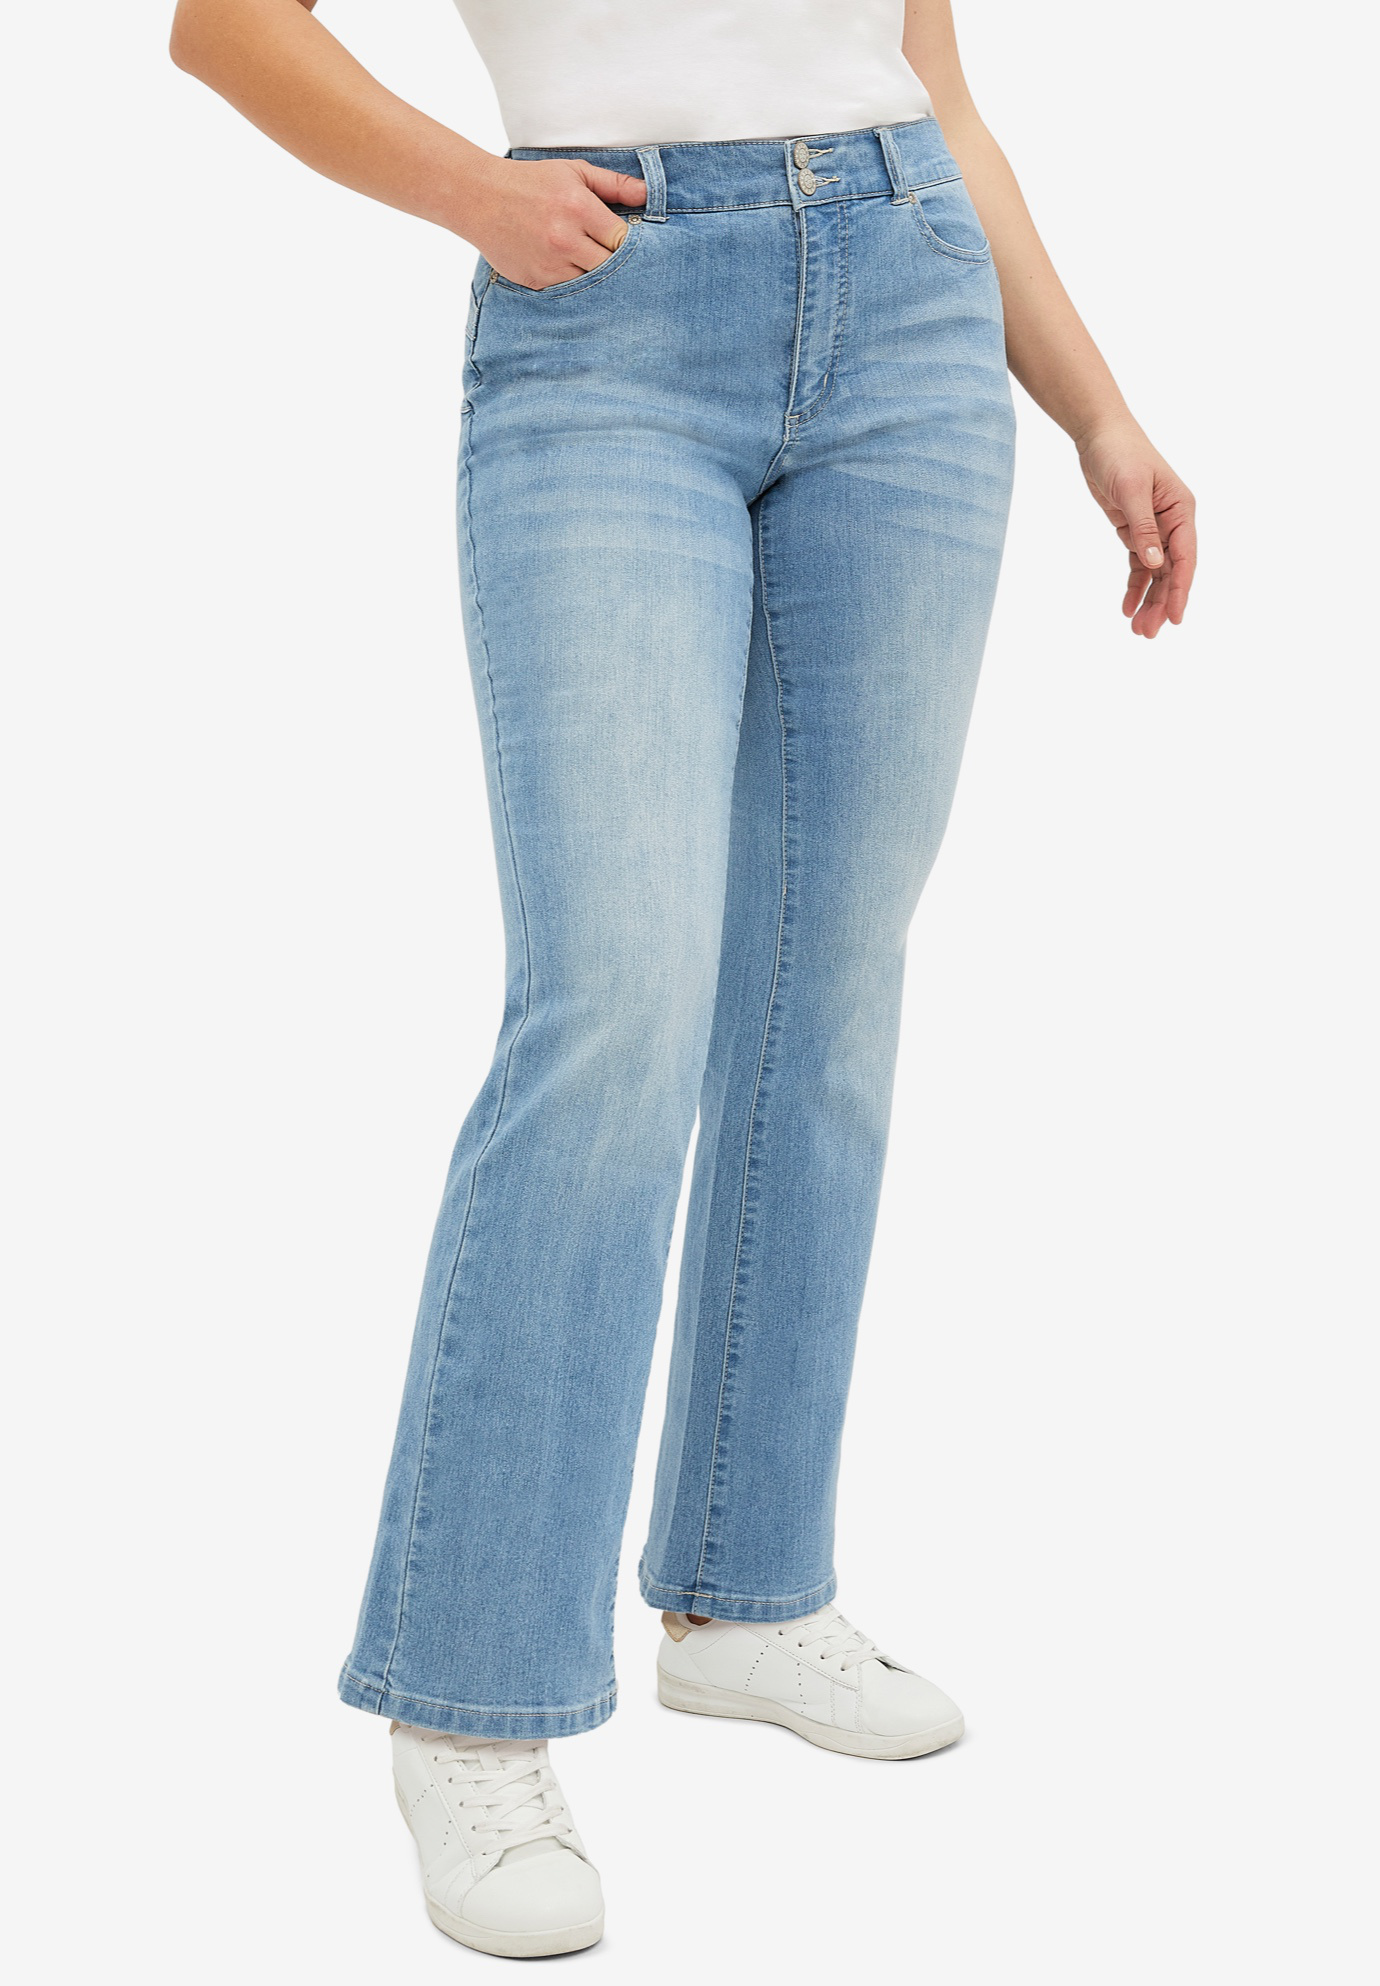 bootcut jeans back